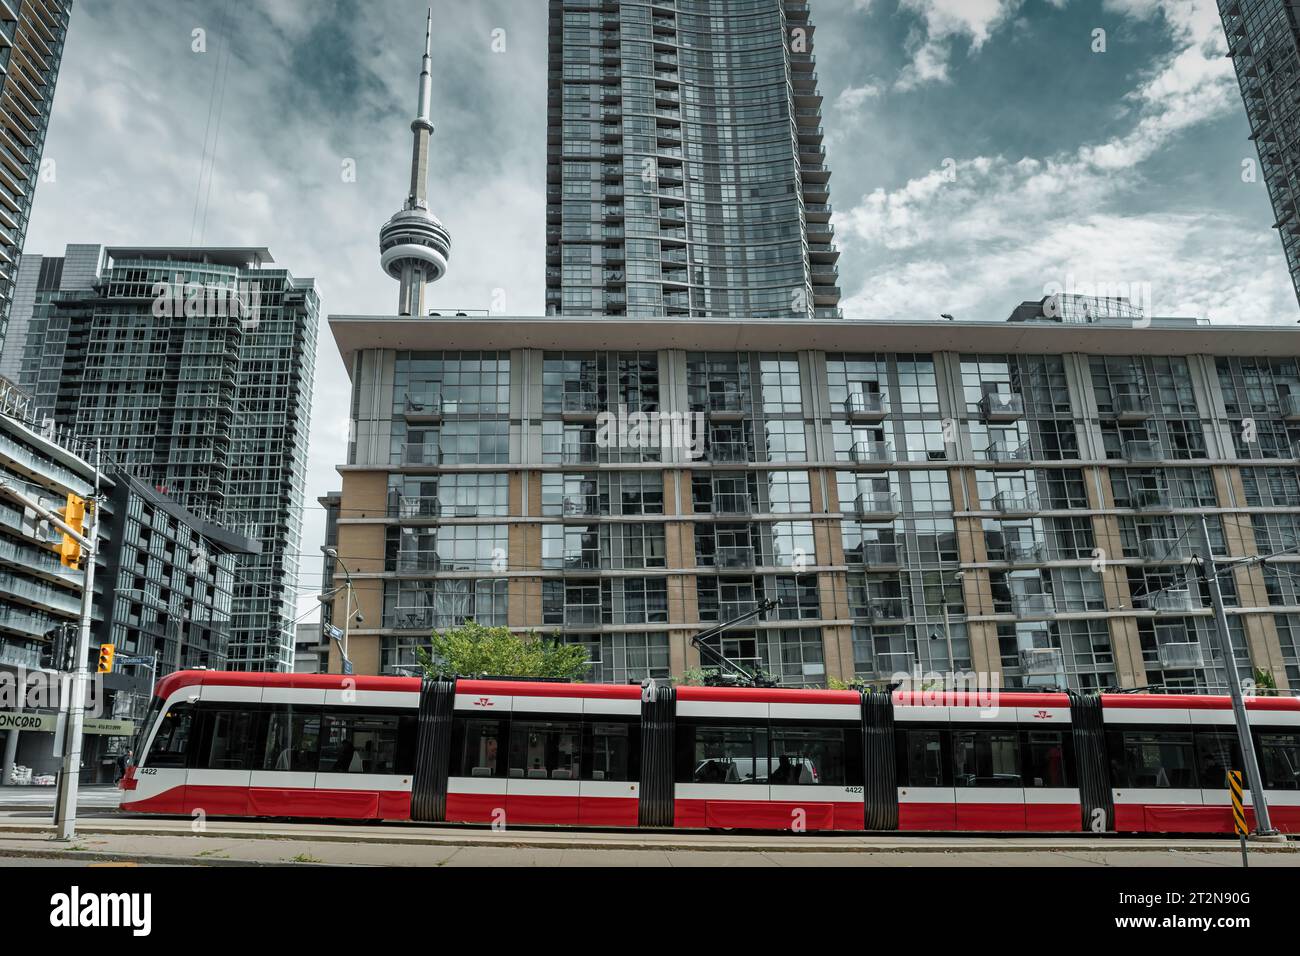 Red streetcar and condos in downtown Toronto, Ontario, Canada. Stock Photo